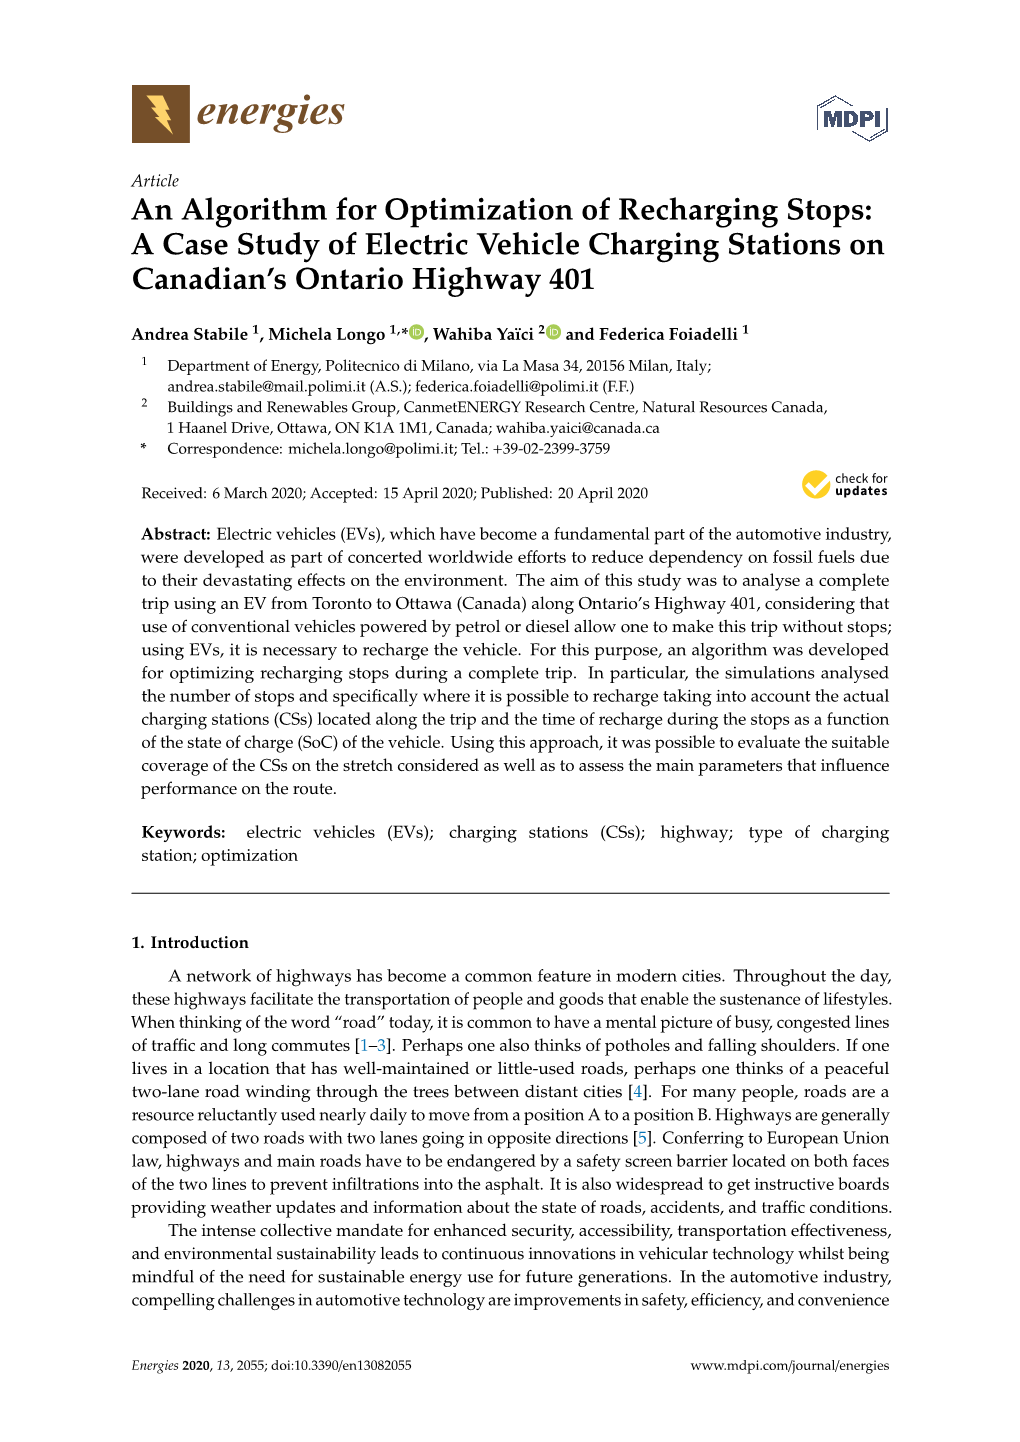 An Algorithm for Optimization of Recharging Stops: a Case Study of Electric Vehicle Charging Stations on Canadian’S Ontario Highway 401